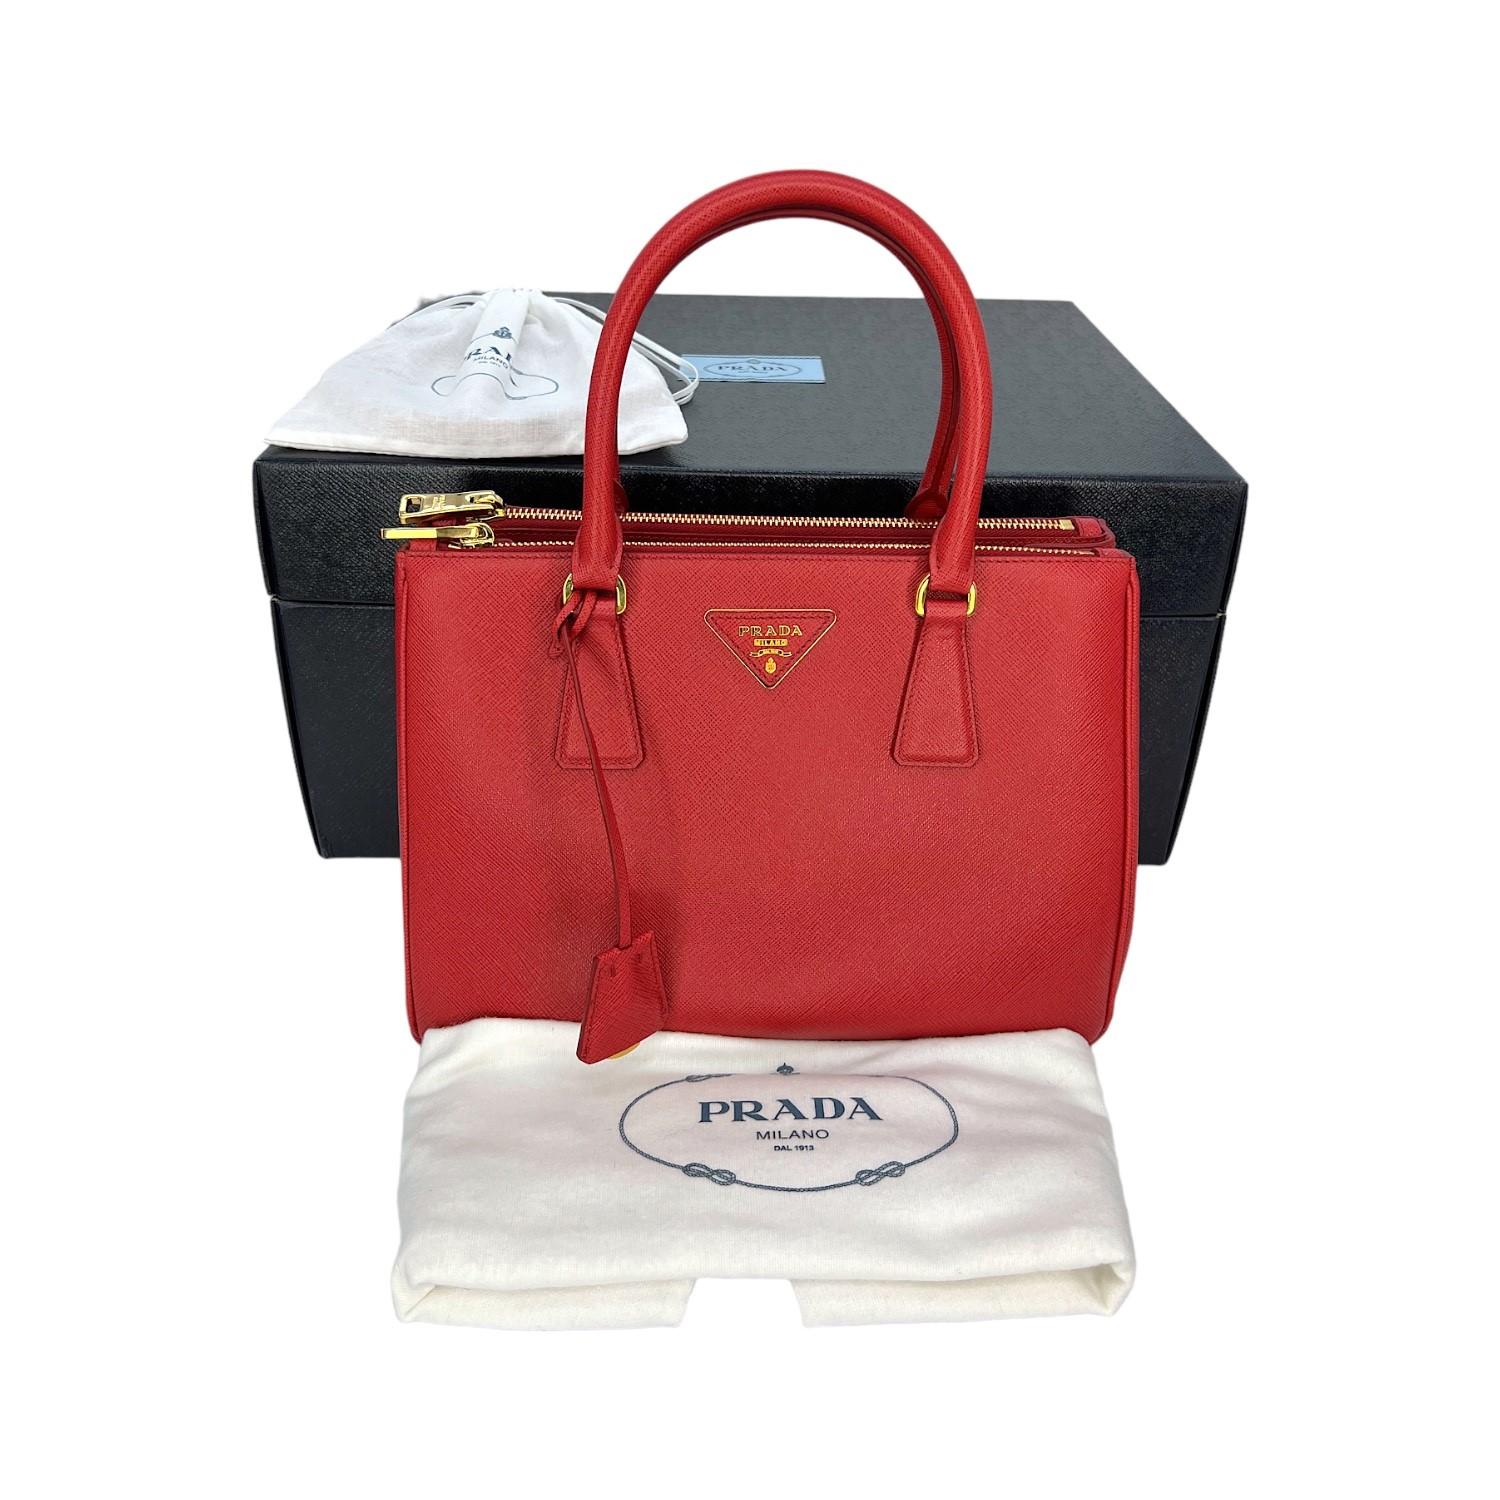 This Prada Small Double Zip Galleria Tote was made in Italy and it is finely crafted of a Saffiano Lux Leather exterior with gold-tone hardware features. It has dual rolled leather top handles. It comes with a attachable and adjustable shoulder